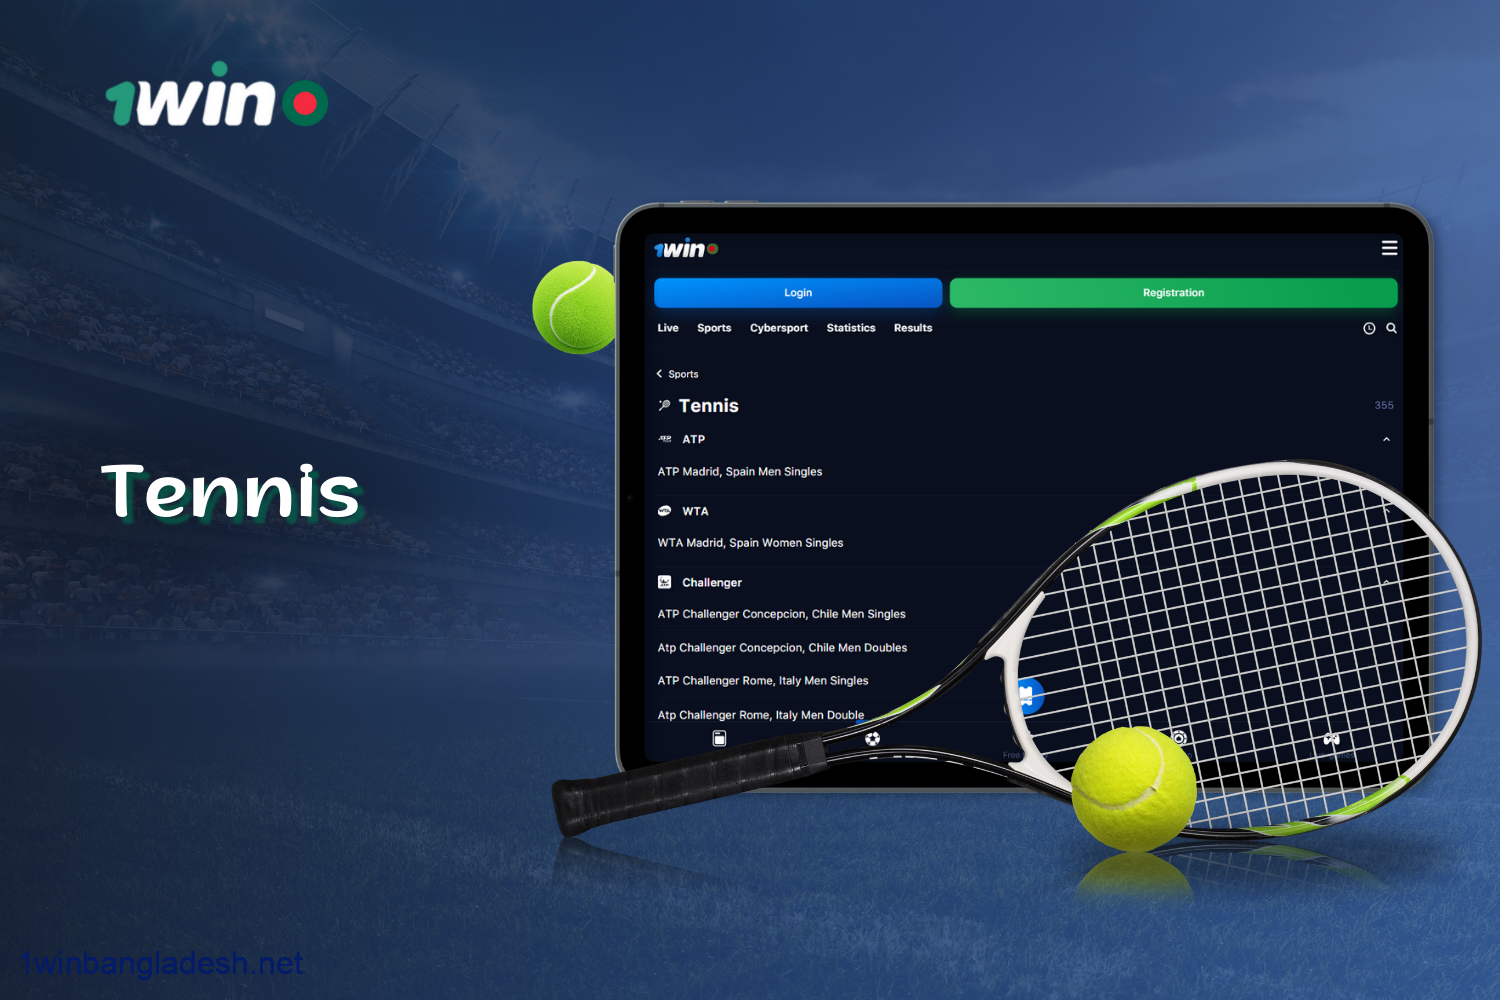 1win offers players from Bangladesh a wide range of Tennis bets in the Sports section